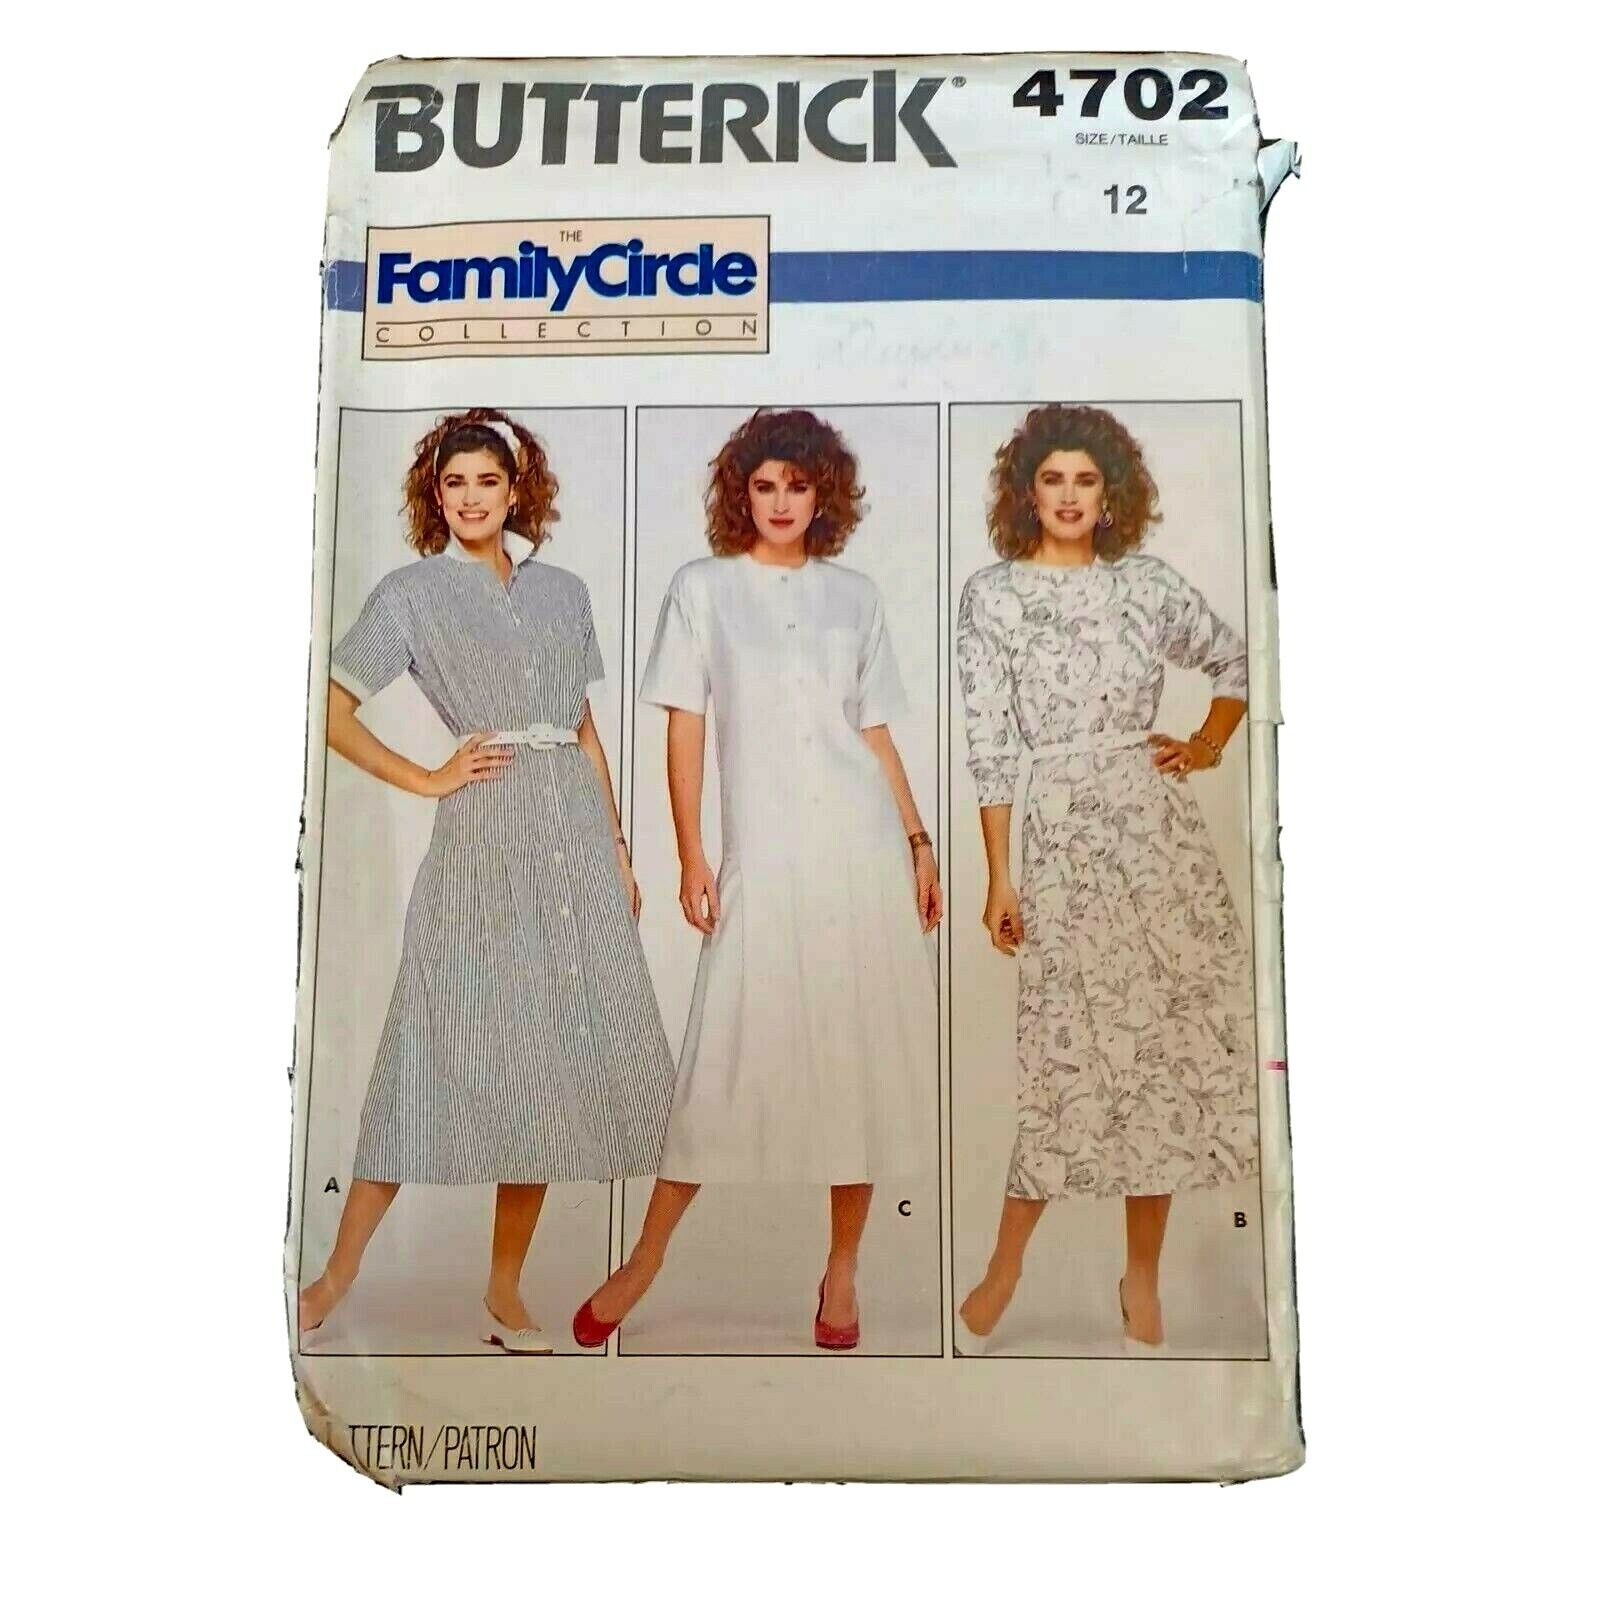 1987 Butterick Sewing Pattern 4702 Size 12 Family Circle Misses Dress Uncut